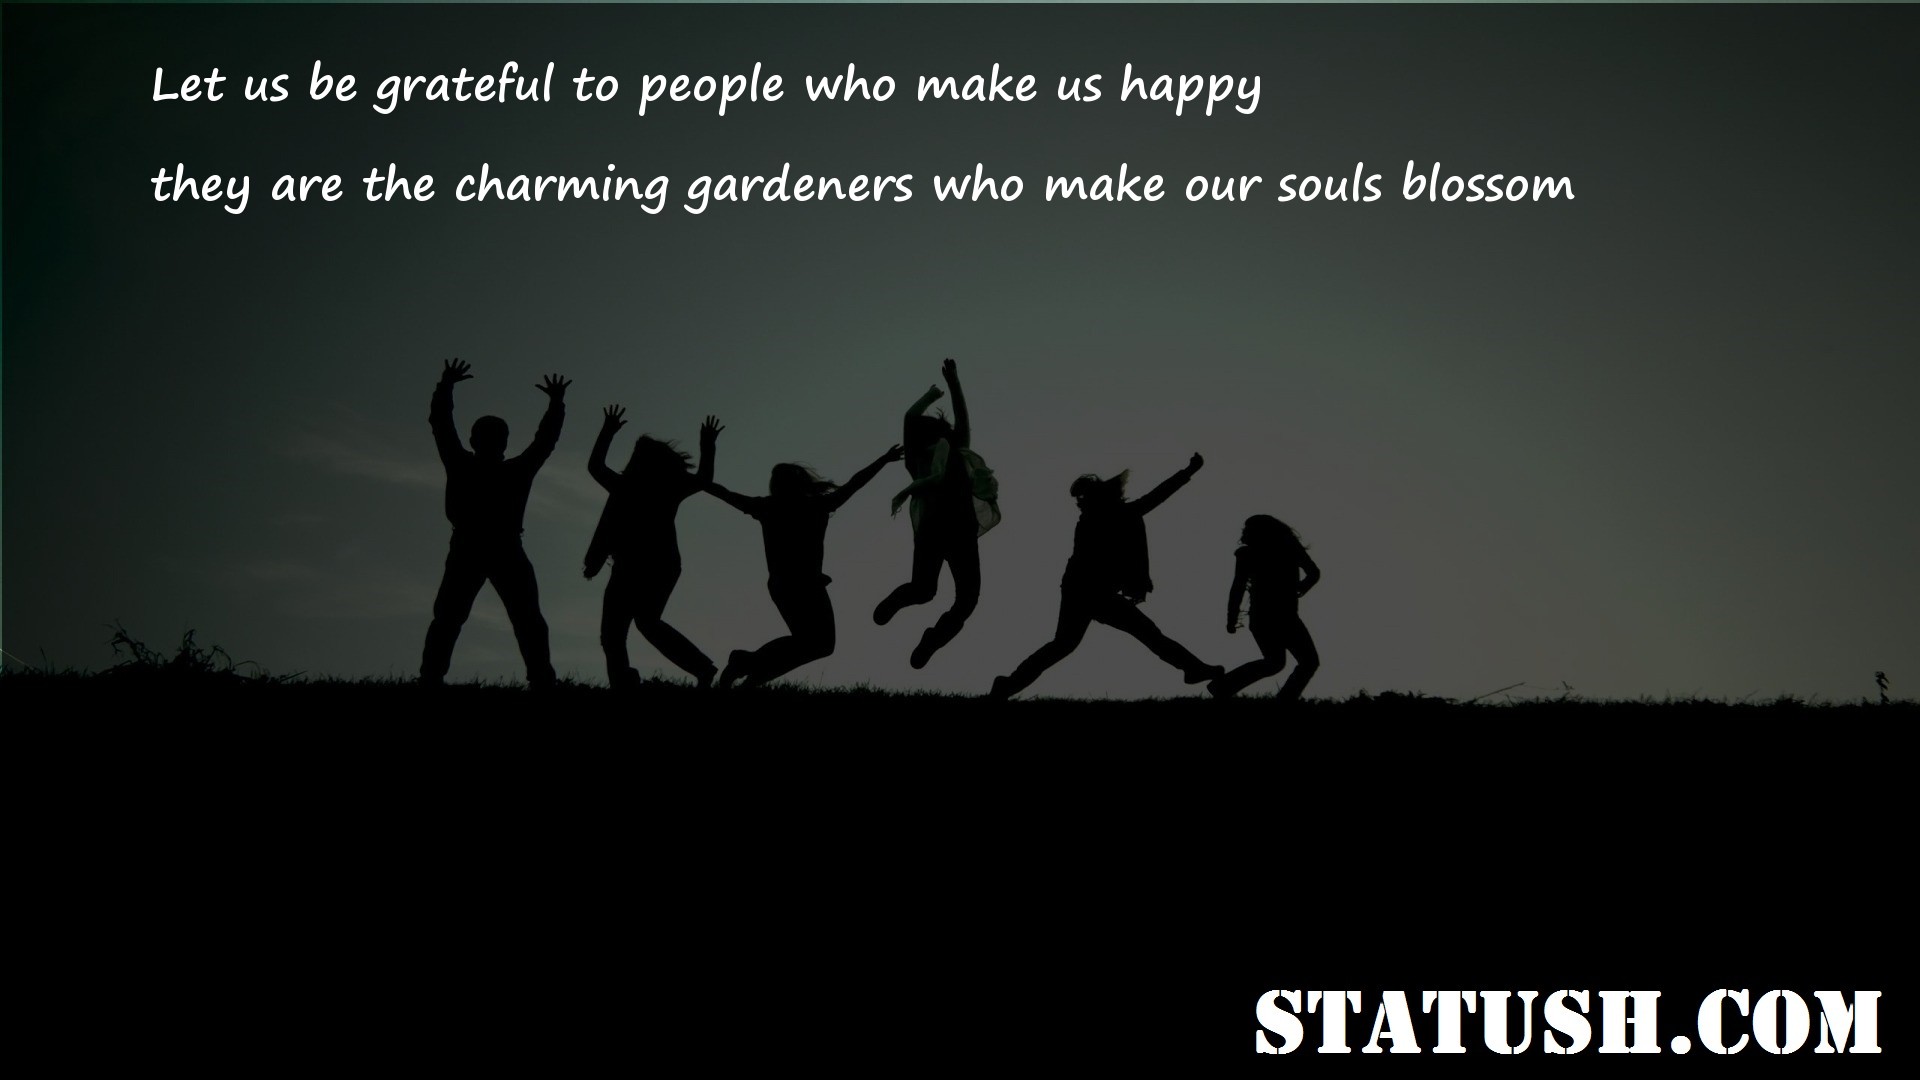 Let us be grateful to people who make us happy